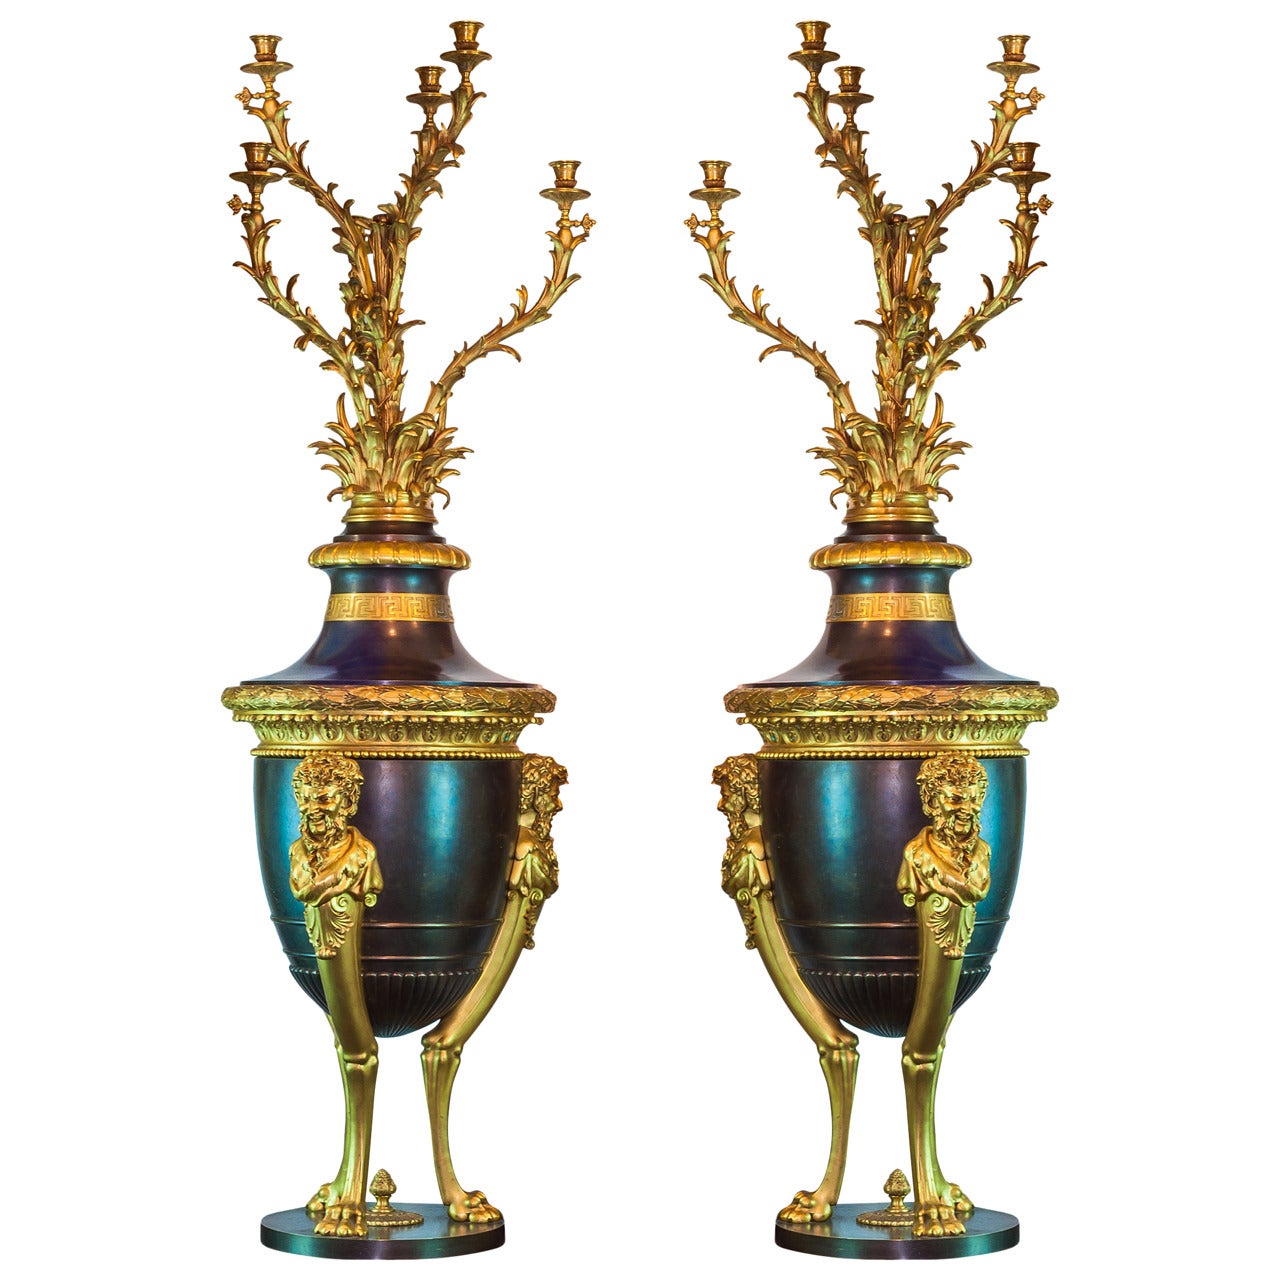 Pair of French Louis XVI Style Patinated and Gilt Bronze Figural Torcheres